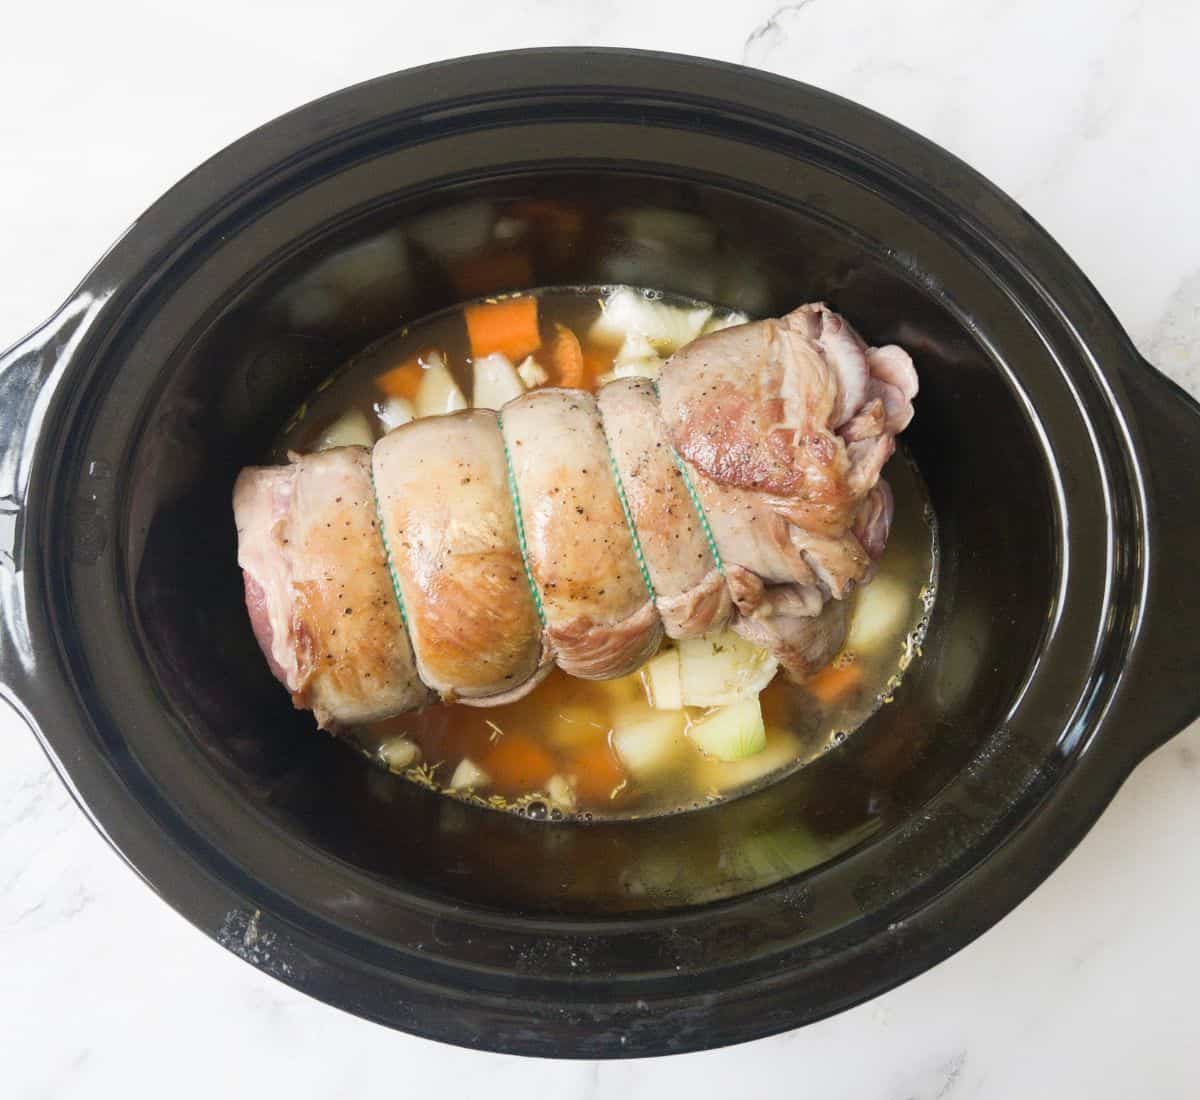 lamb breast laying on a bed of veg and stock in a slow cooker.